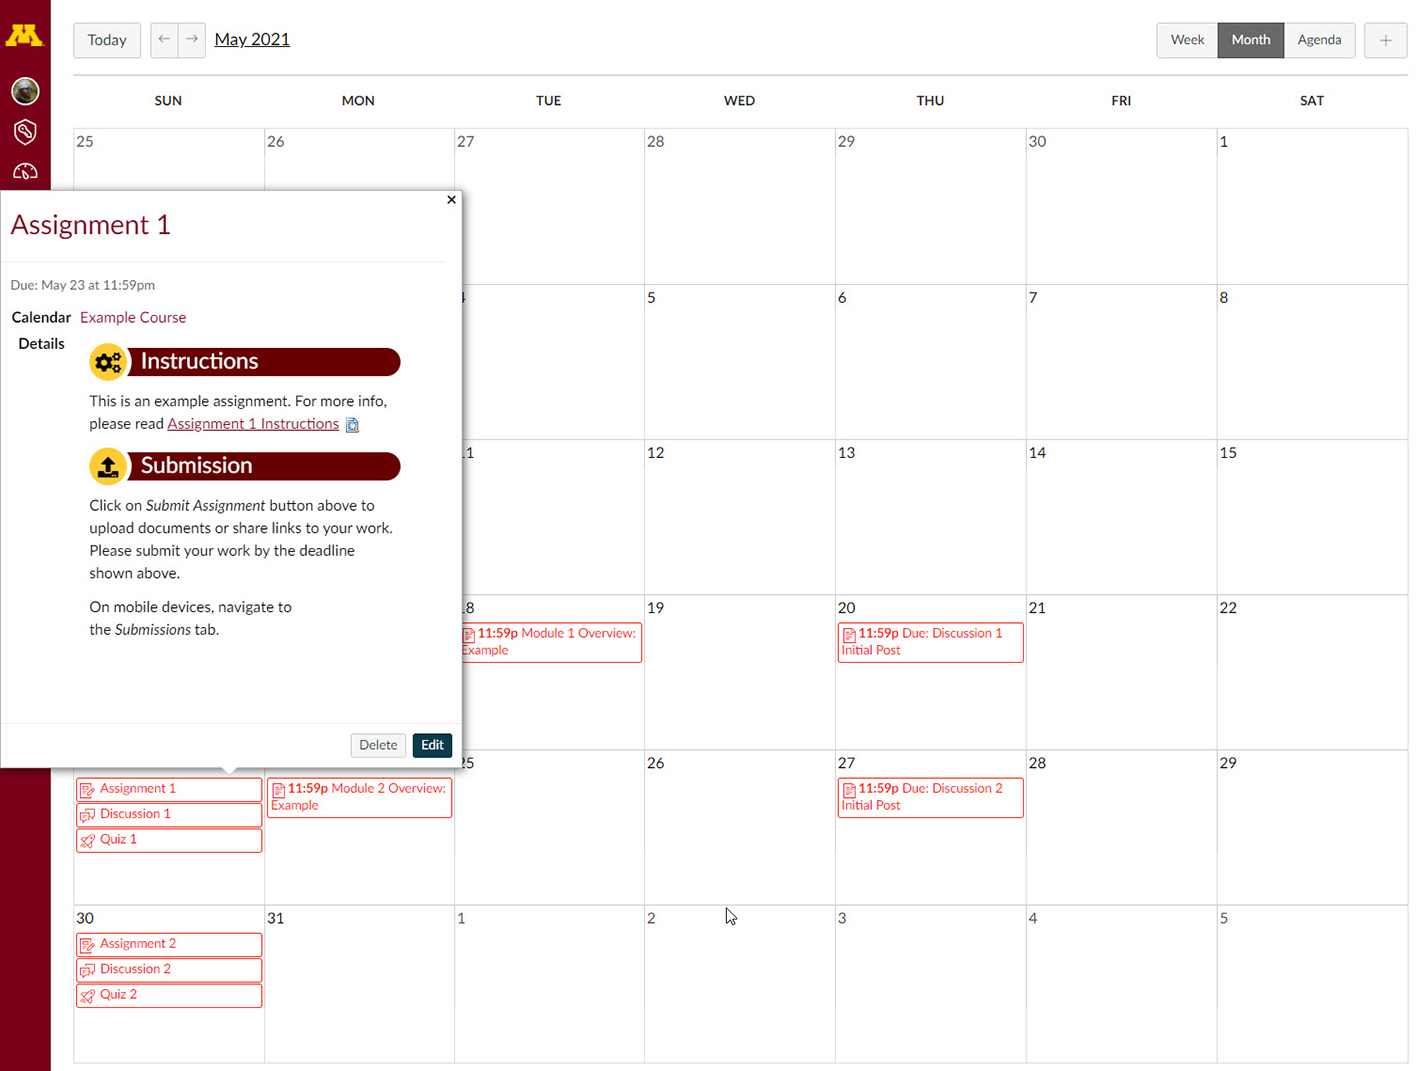 Showing the activities and pages with todo dates on the Canvas Calendar.